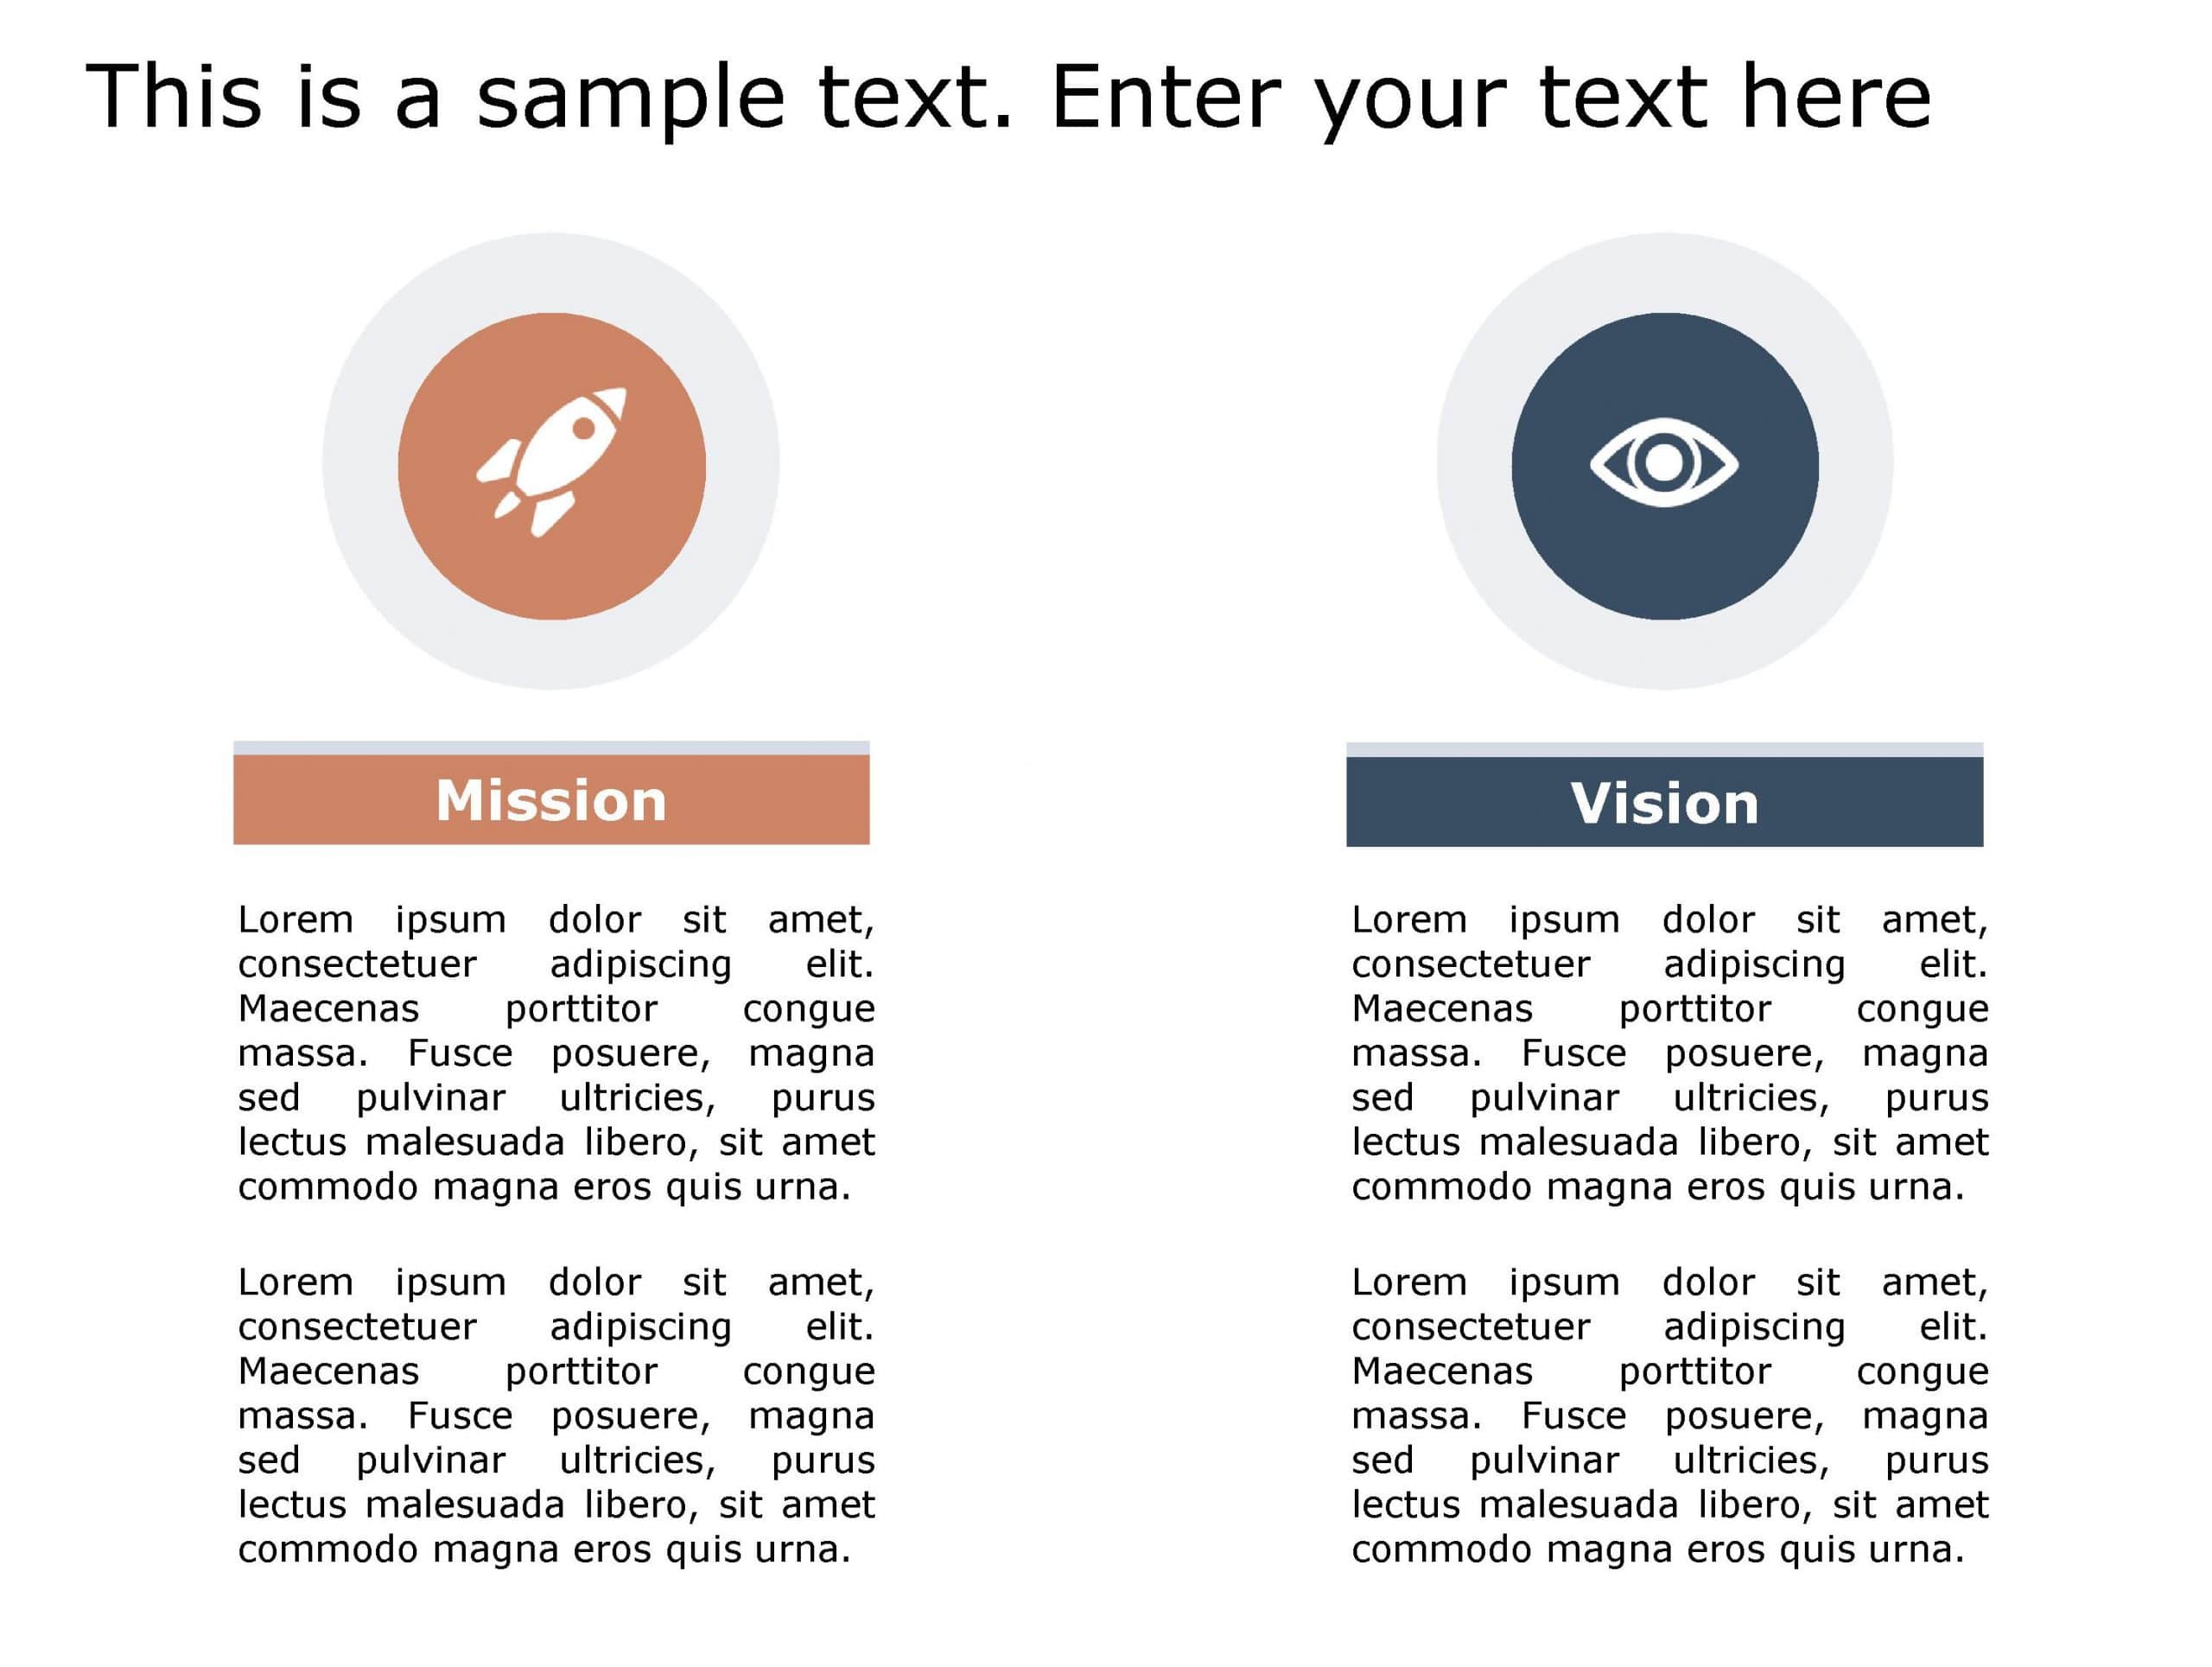 Vision Mission 141 PowerPoint Template & Google Slides Theme